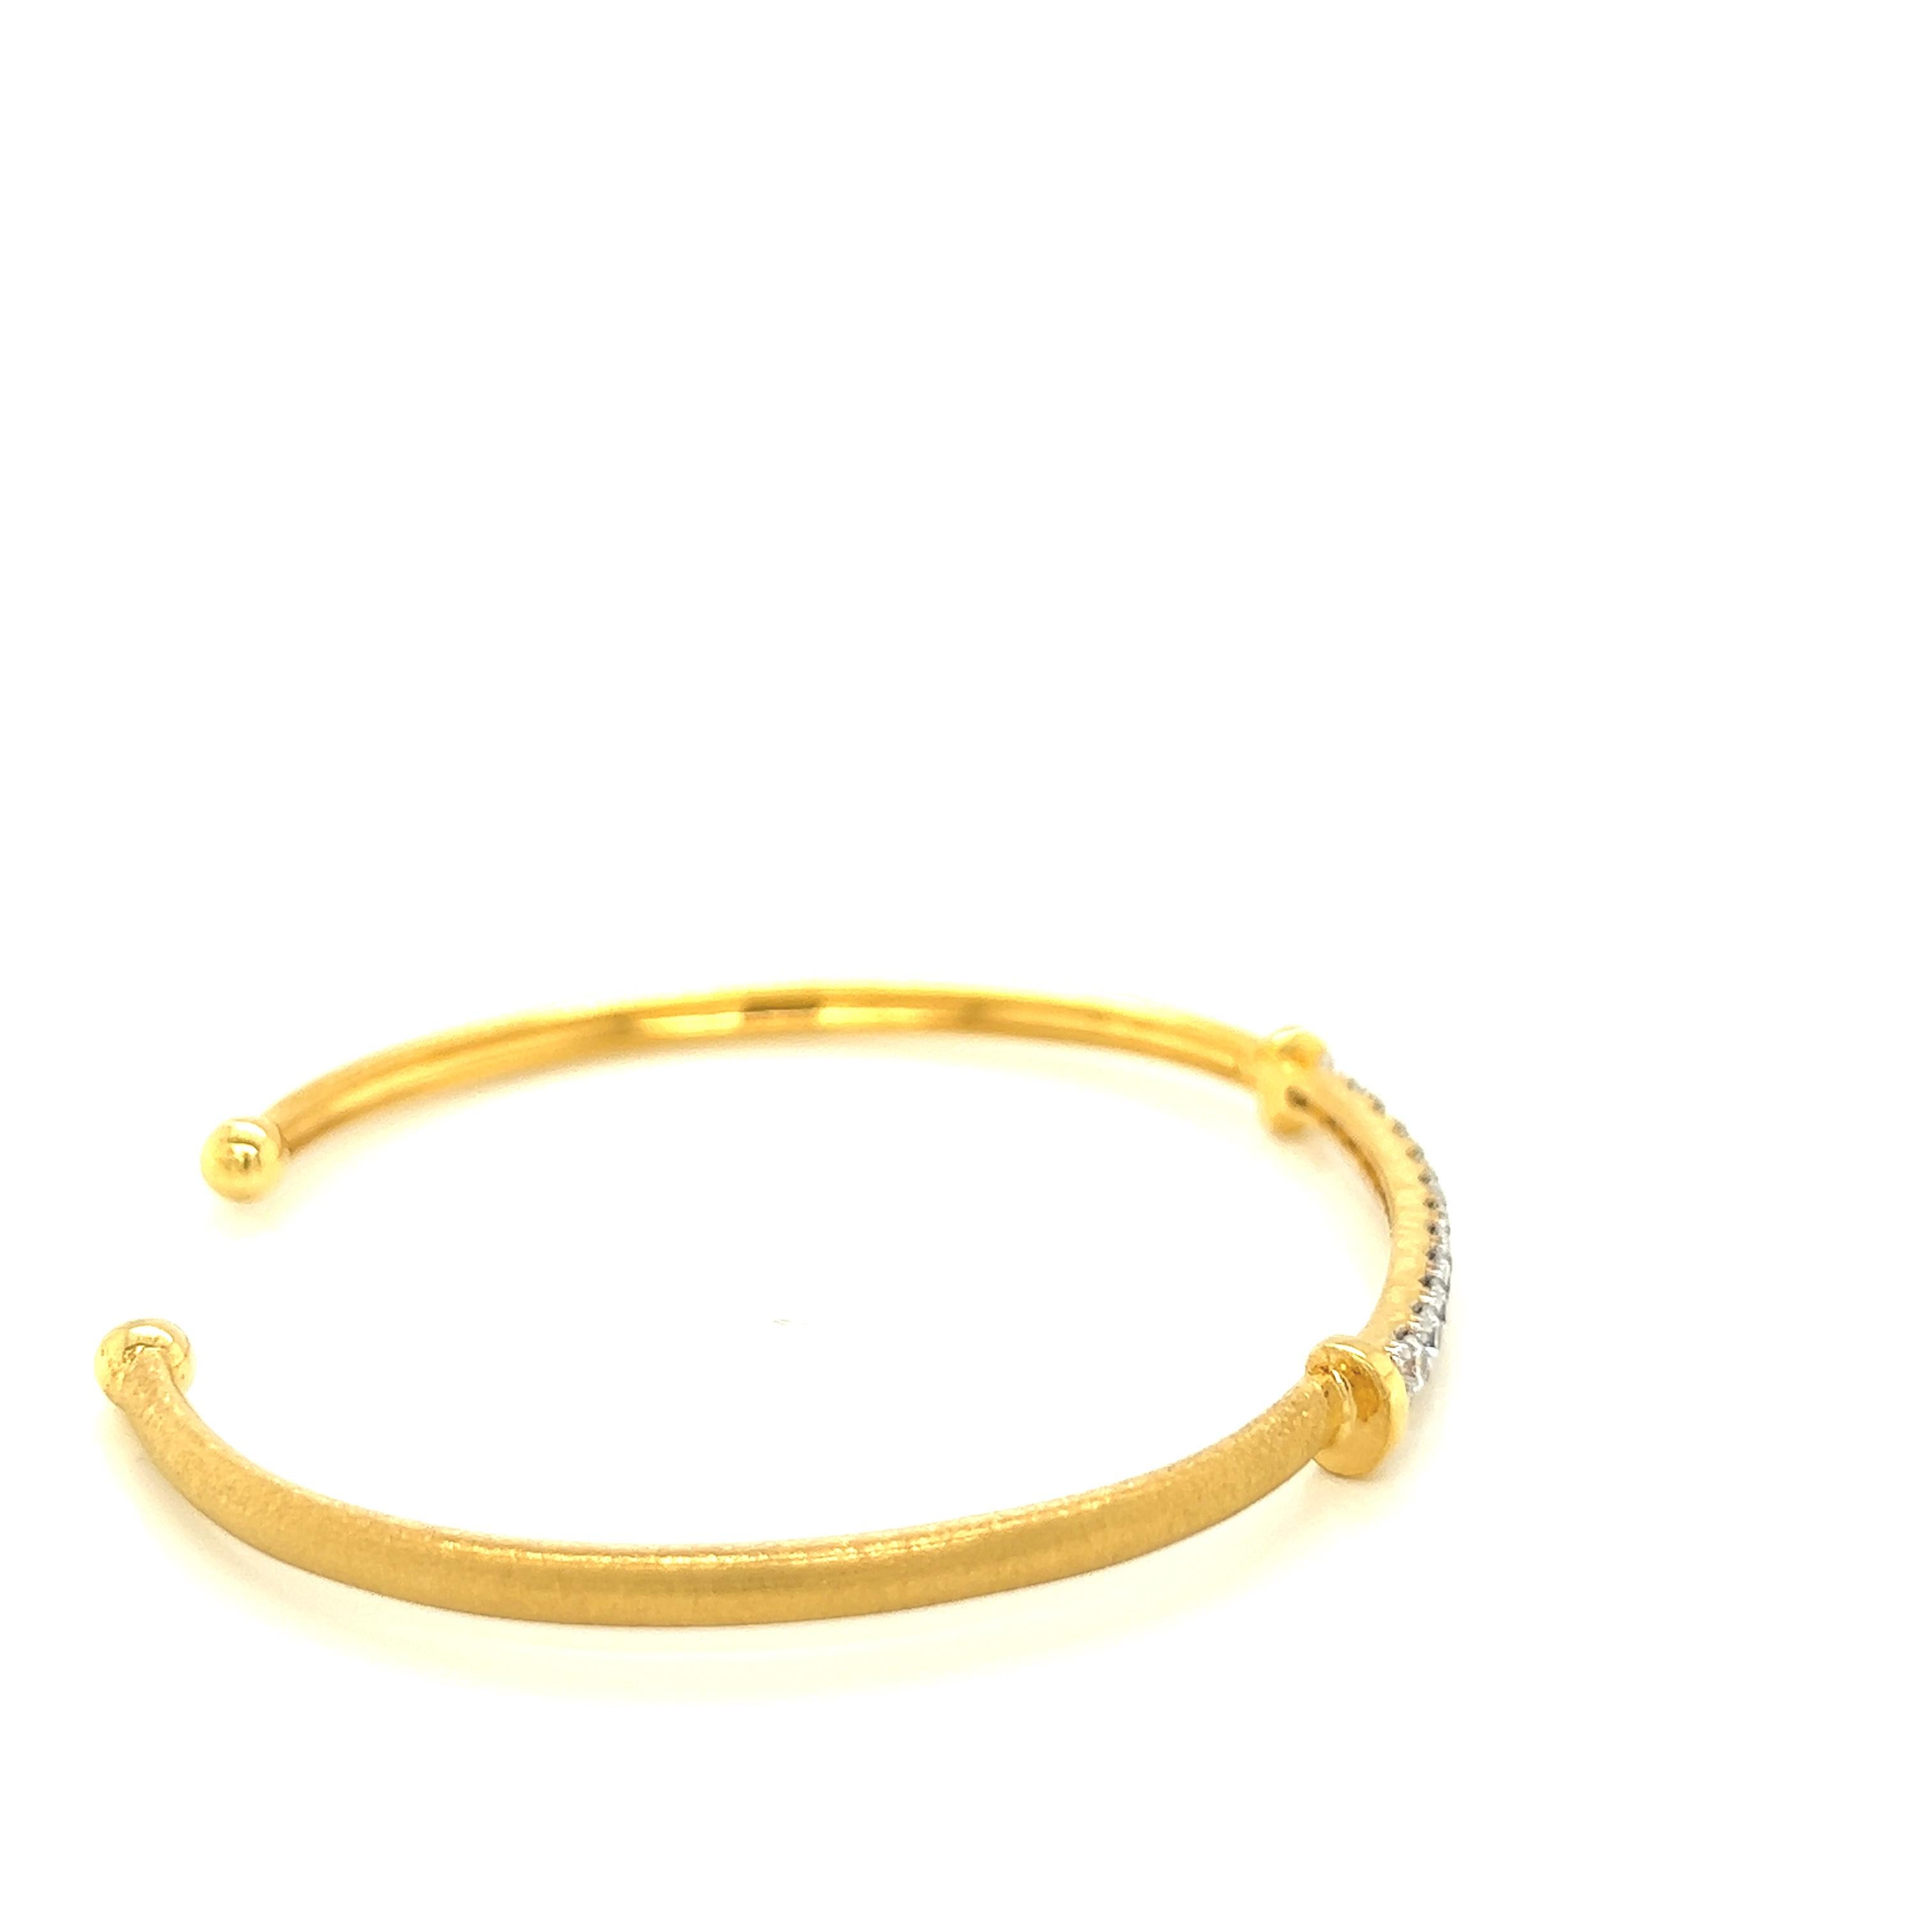 Hand-Crafted 14K Yellow Gold Flexible Bangle Bracelet. In New Condition For Sale In Great Neck, NY